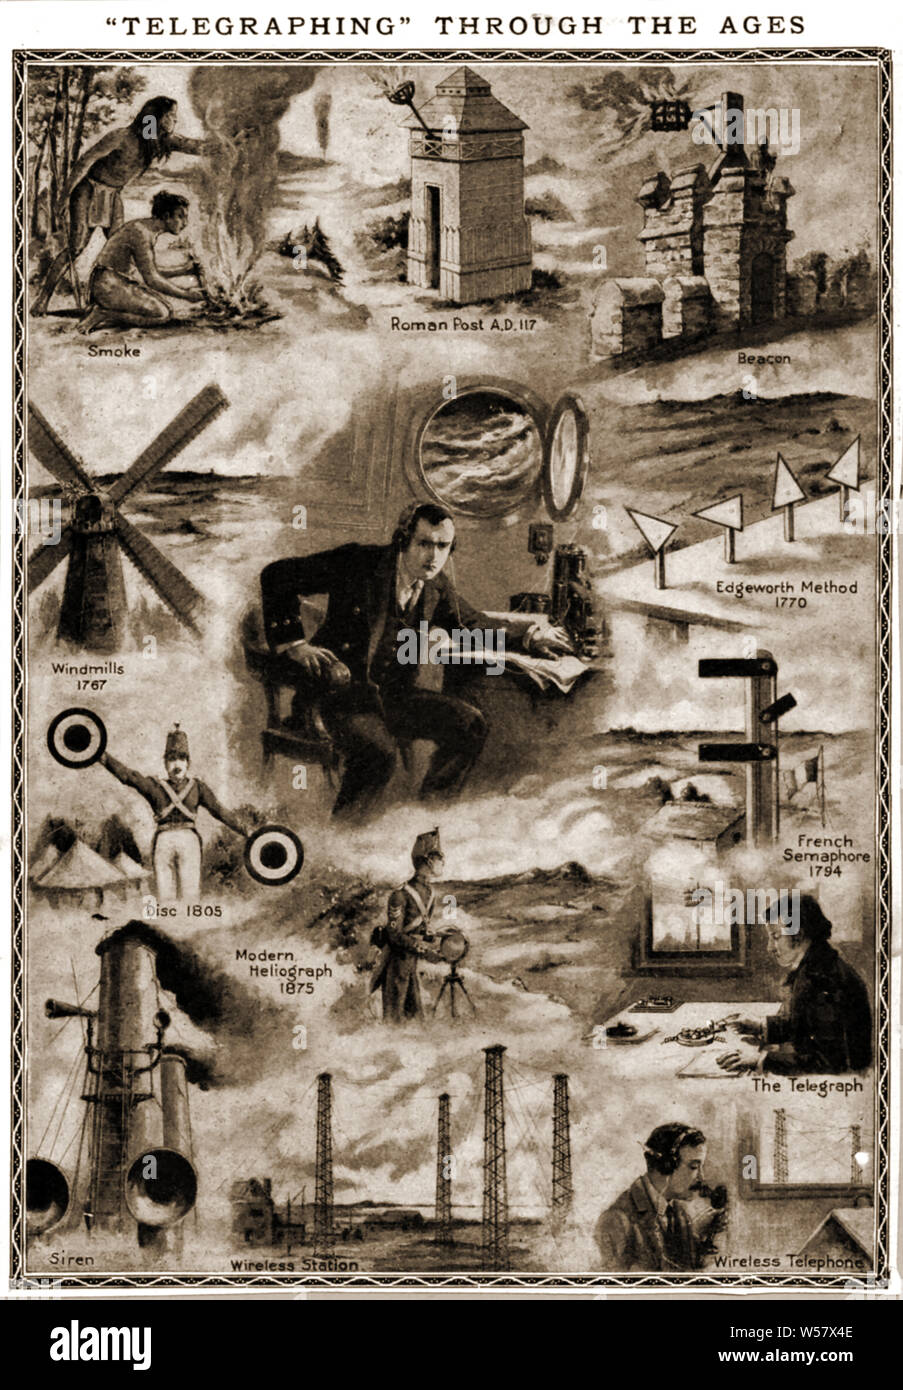 A History of telegraphy and communications 2 -An early illustration showing the history of telegraphy in all its forms through the years Stock Photo